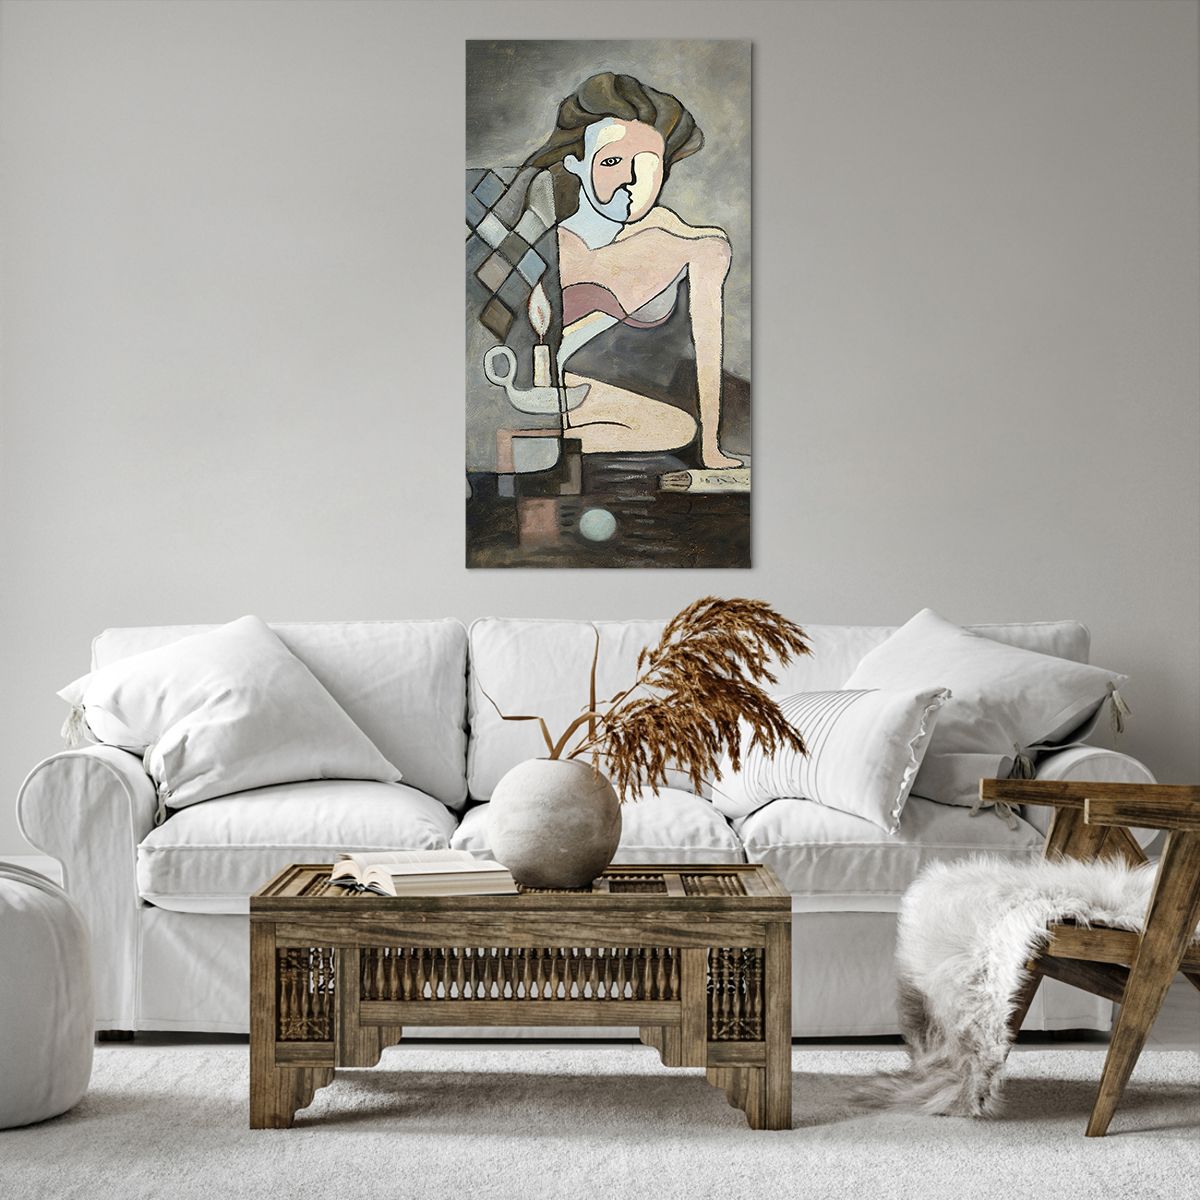 Impression sur toile Abstraction, Impression sur toile Cubisme, Impression sur toile Personnes, Impression sur toile Art, Impression sur toile Peinture